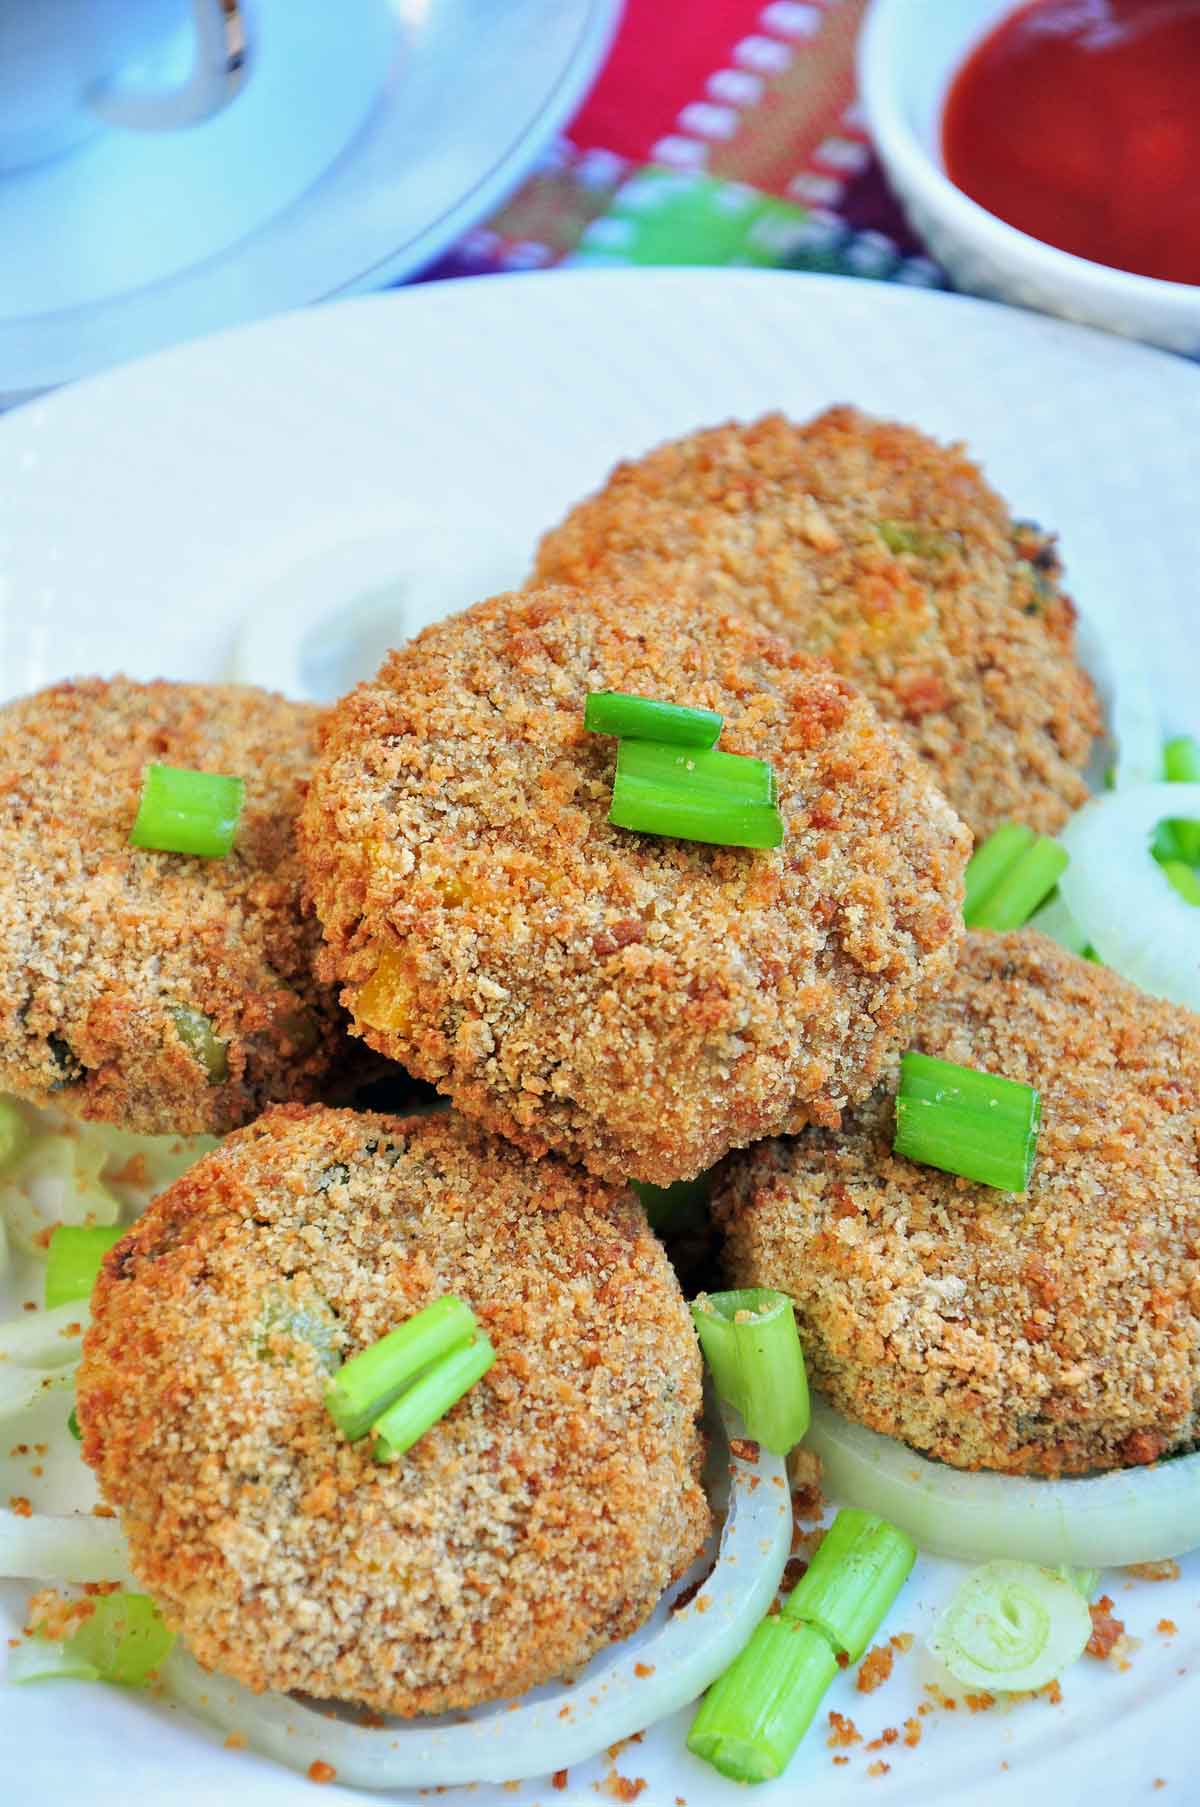 Vegetable cutlet served in a plate.